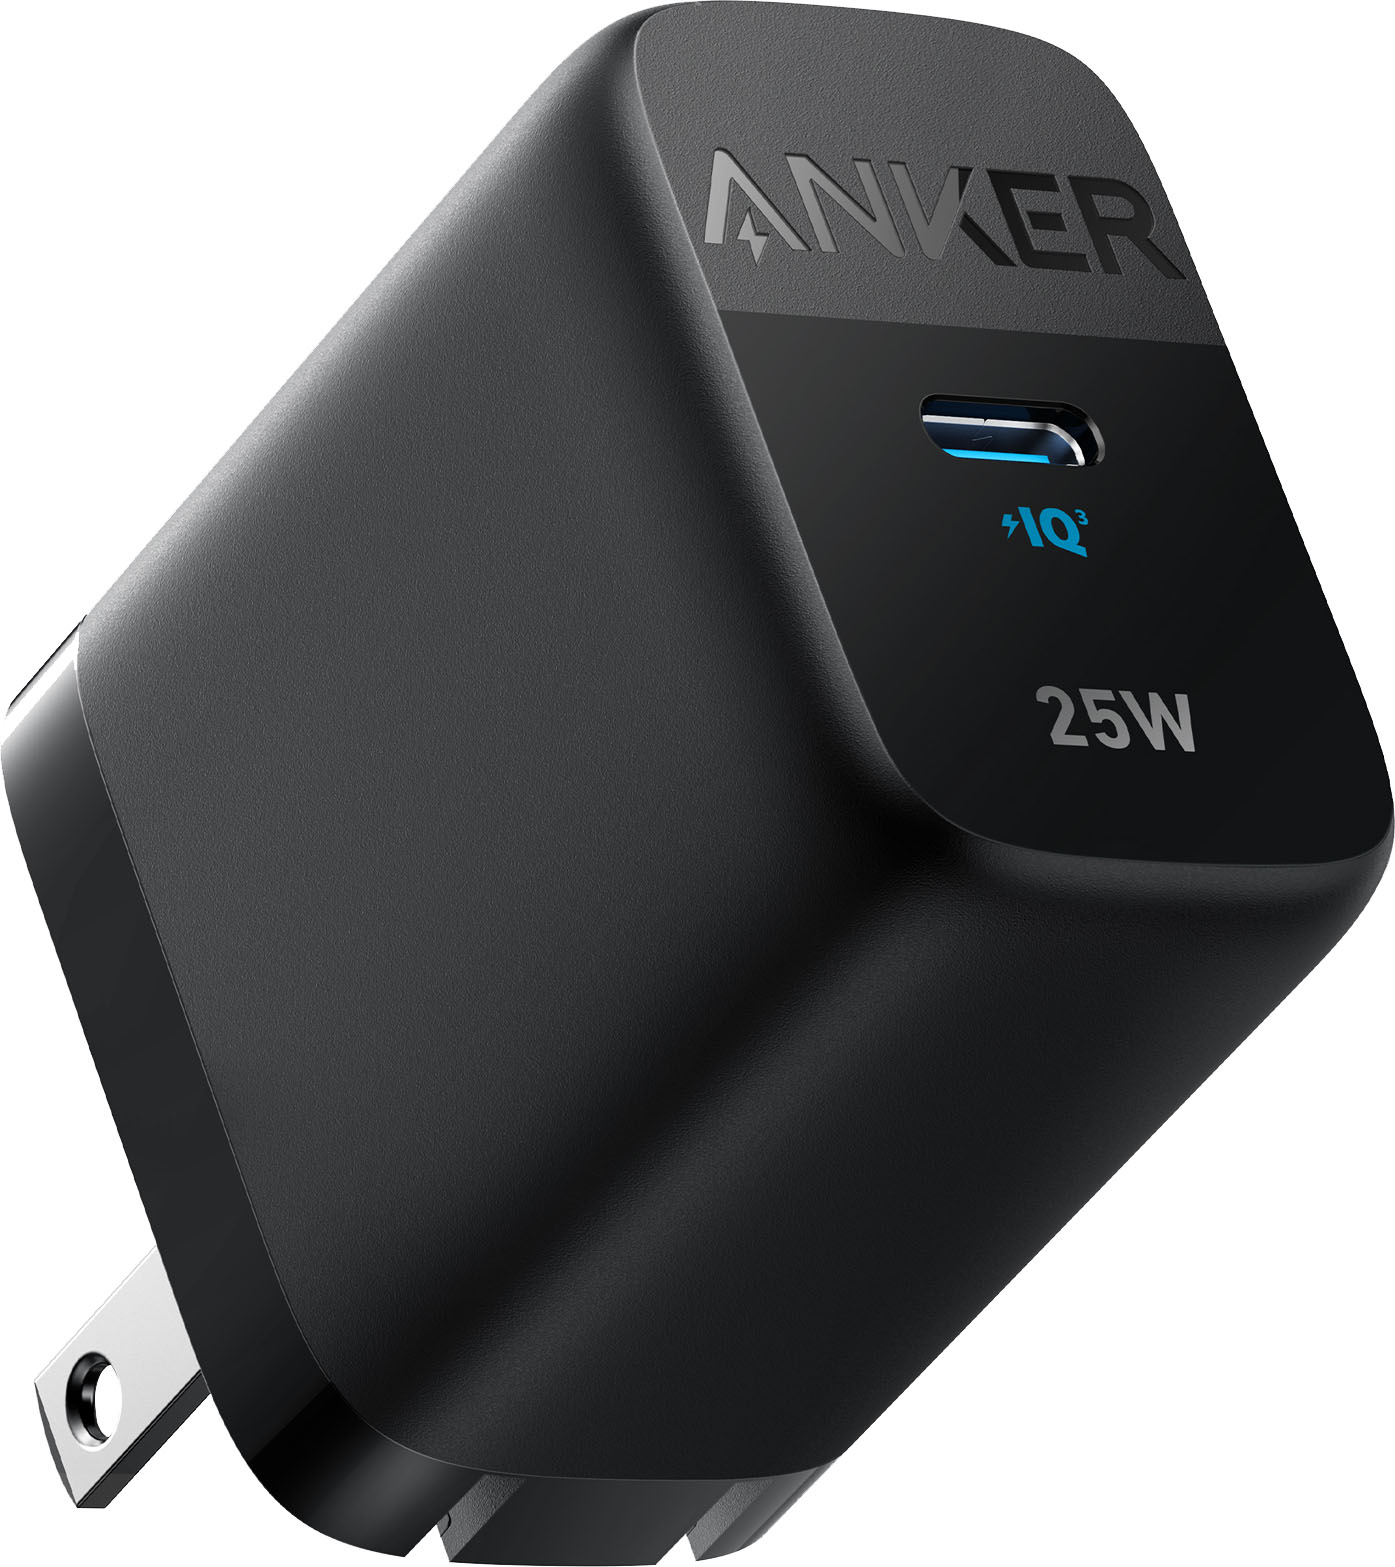 Anker 312 Charger (Ace 2, 25W) Black A2642J11-1 - Best Buy